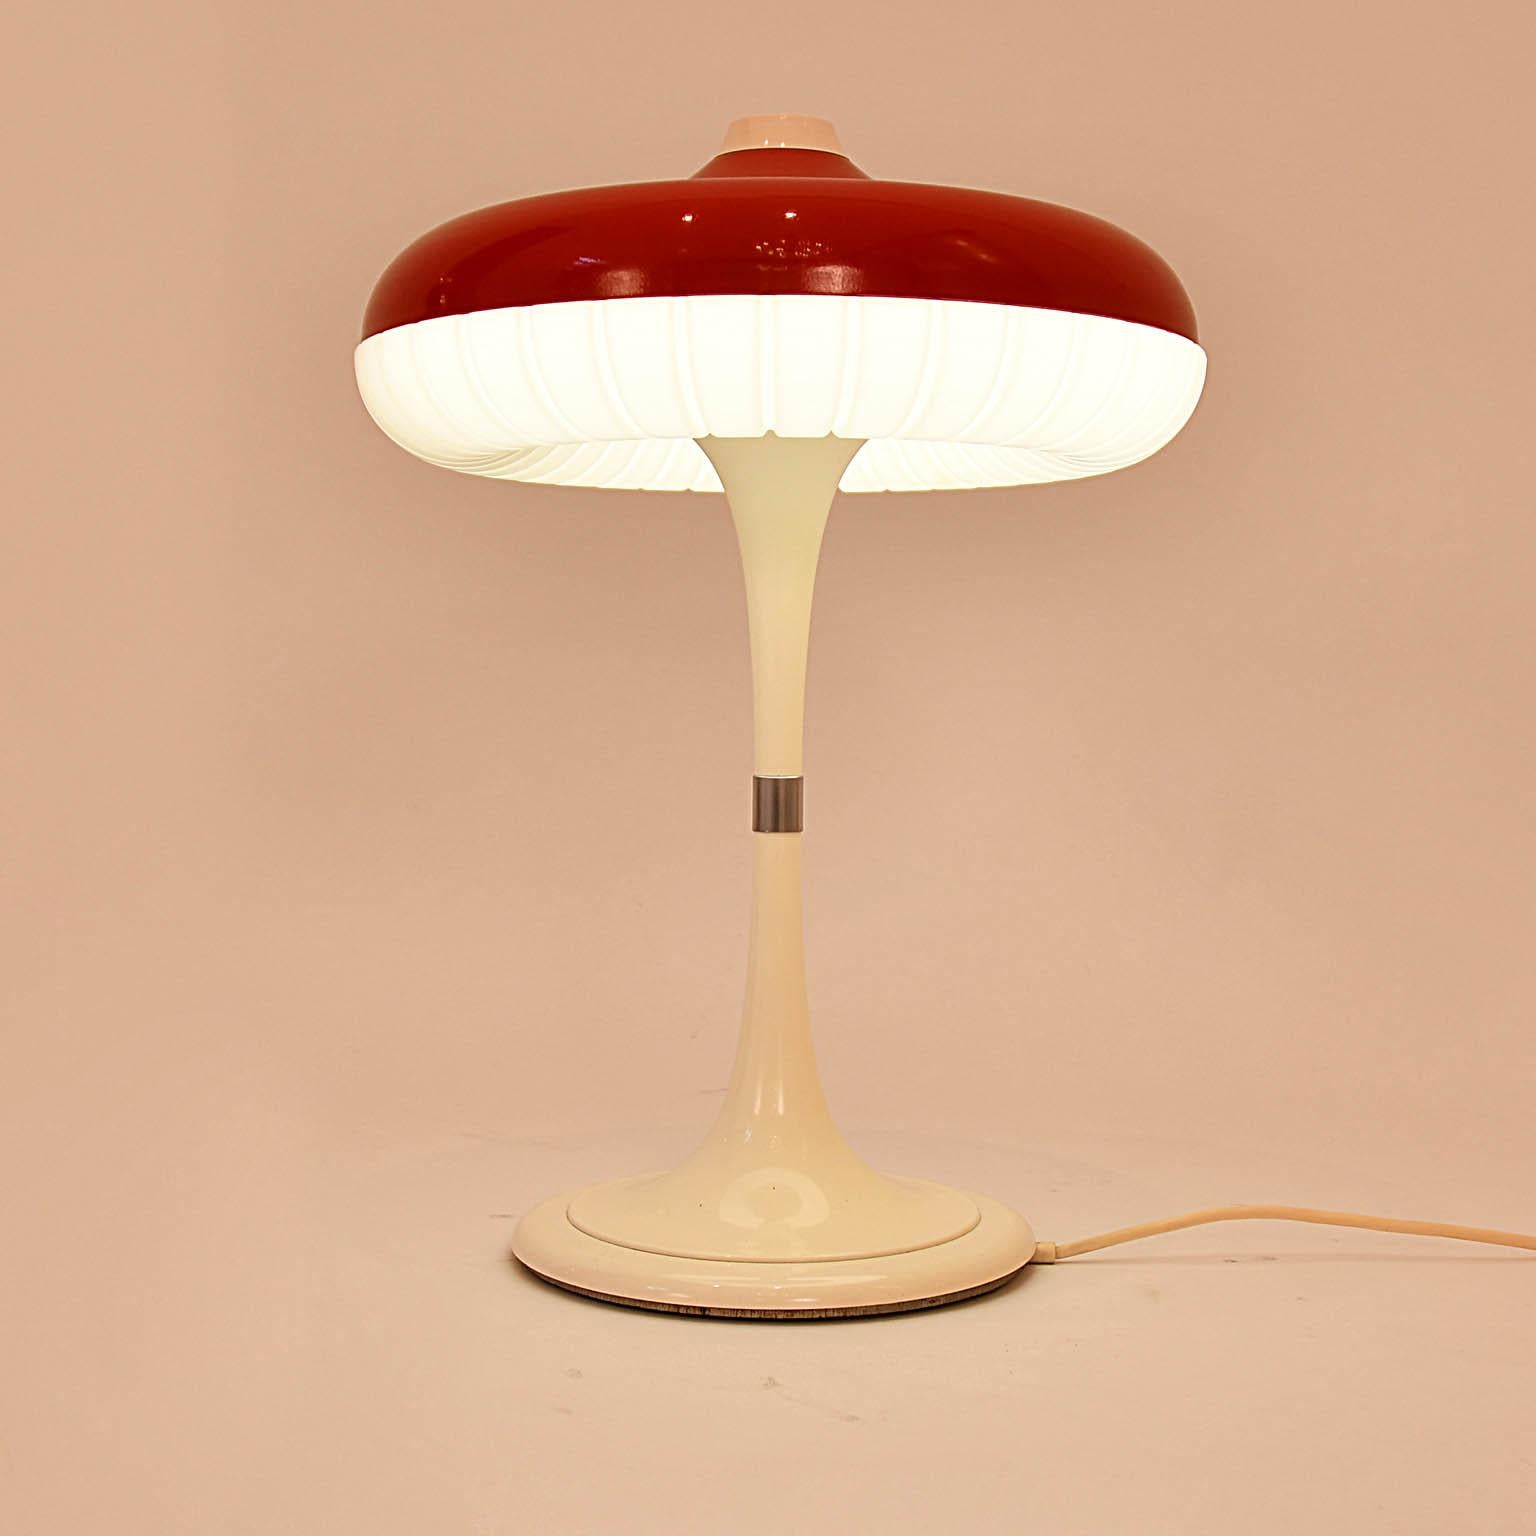 Metal Table Lamp Red x White Space Age 1960s by Siemens, Germany